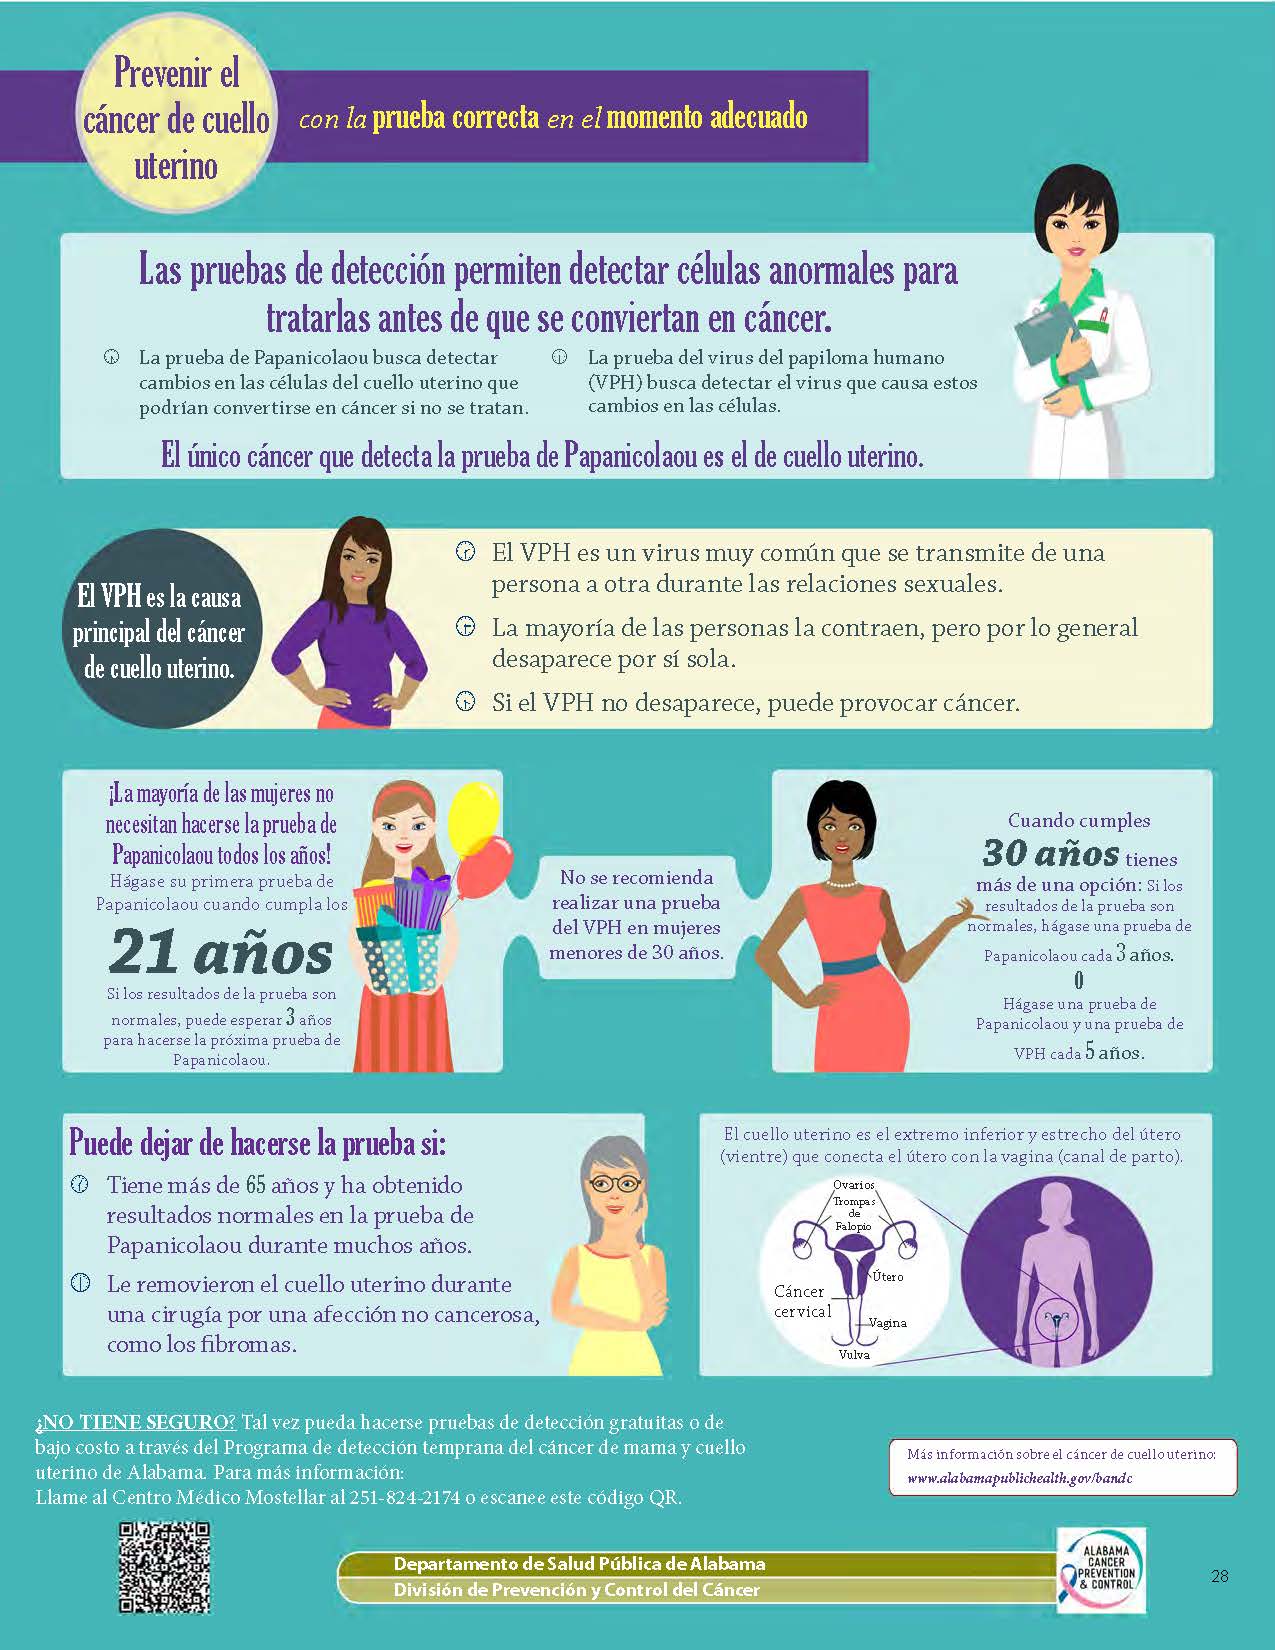 Prevent Cervical Cancer with the Right Test at the Right Time (Spanish)